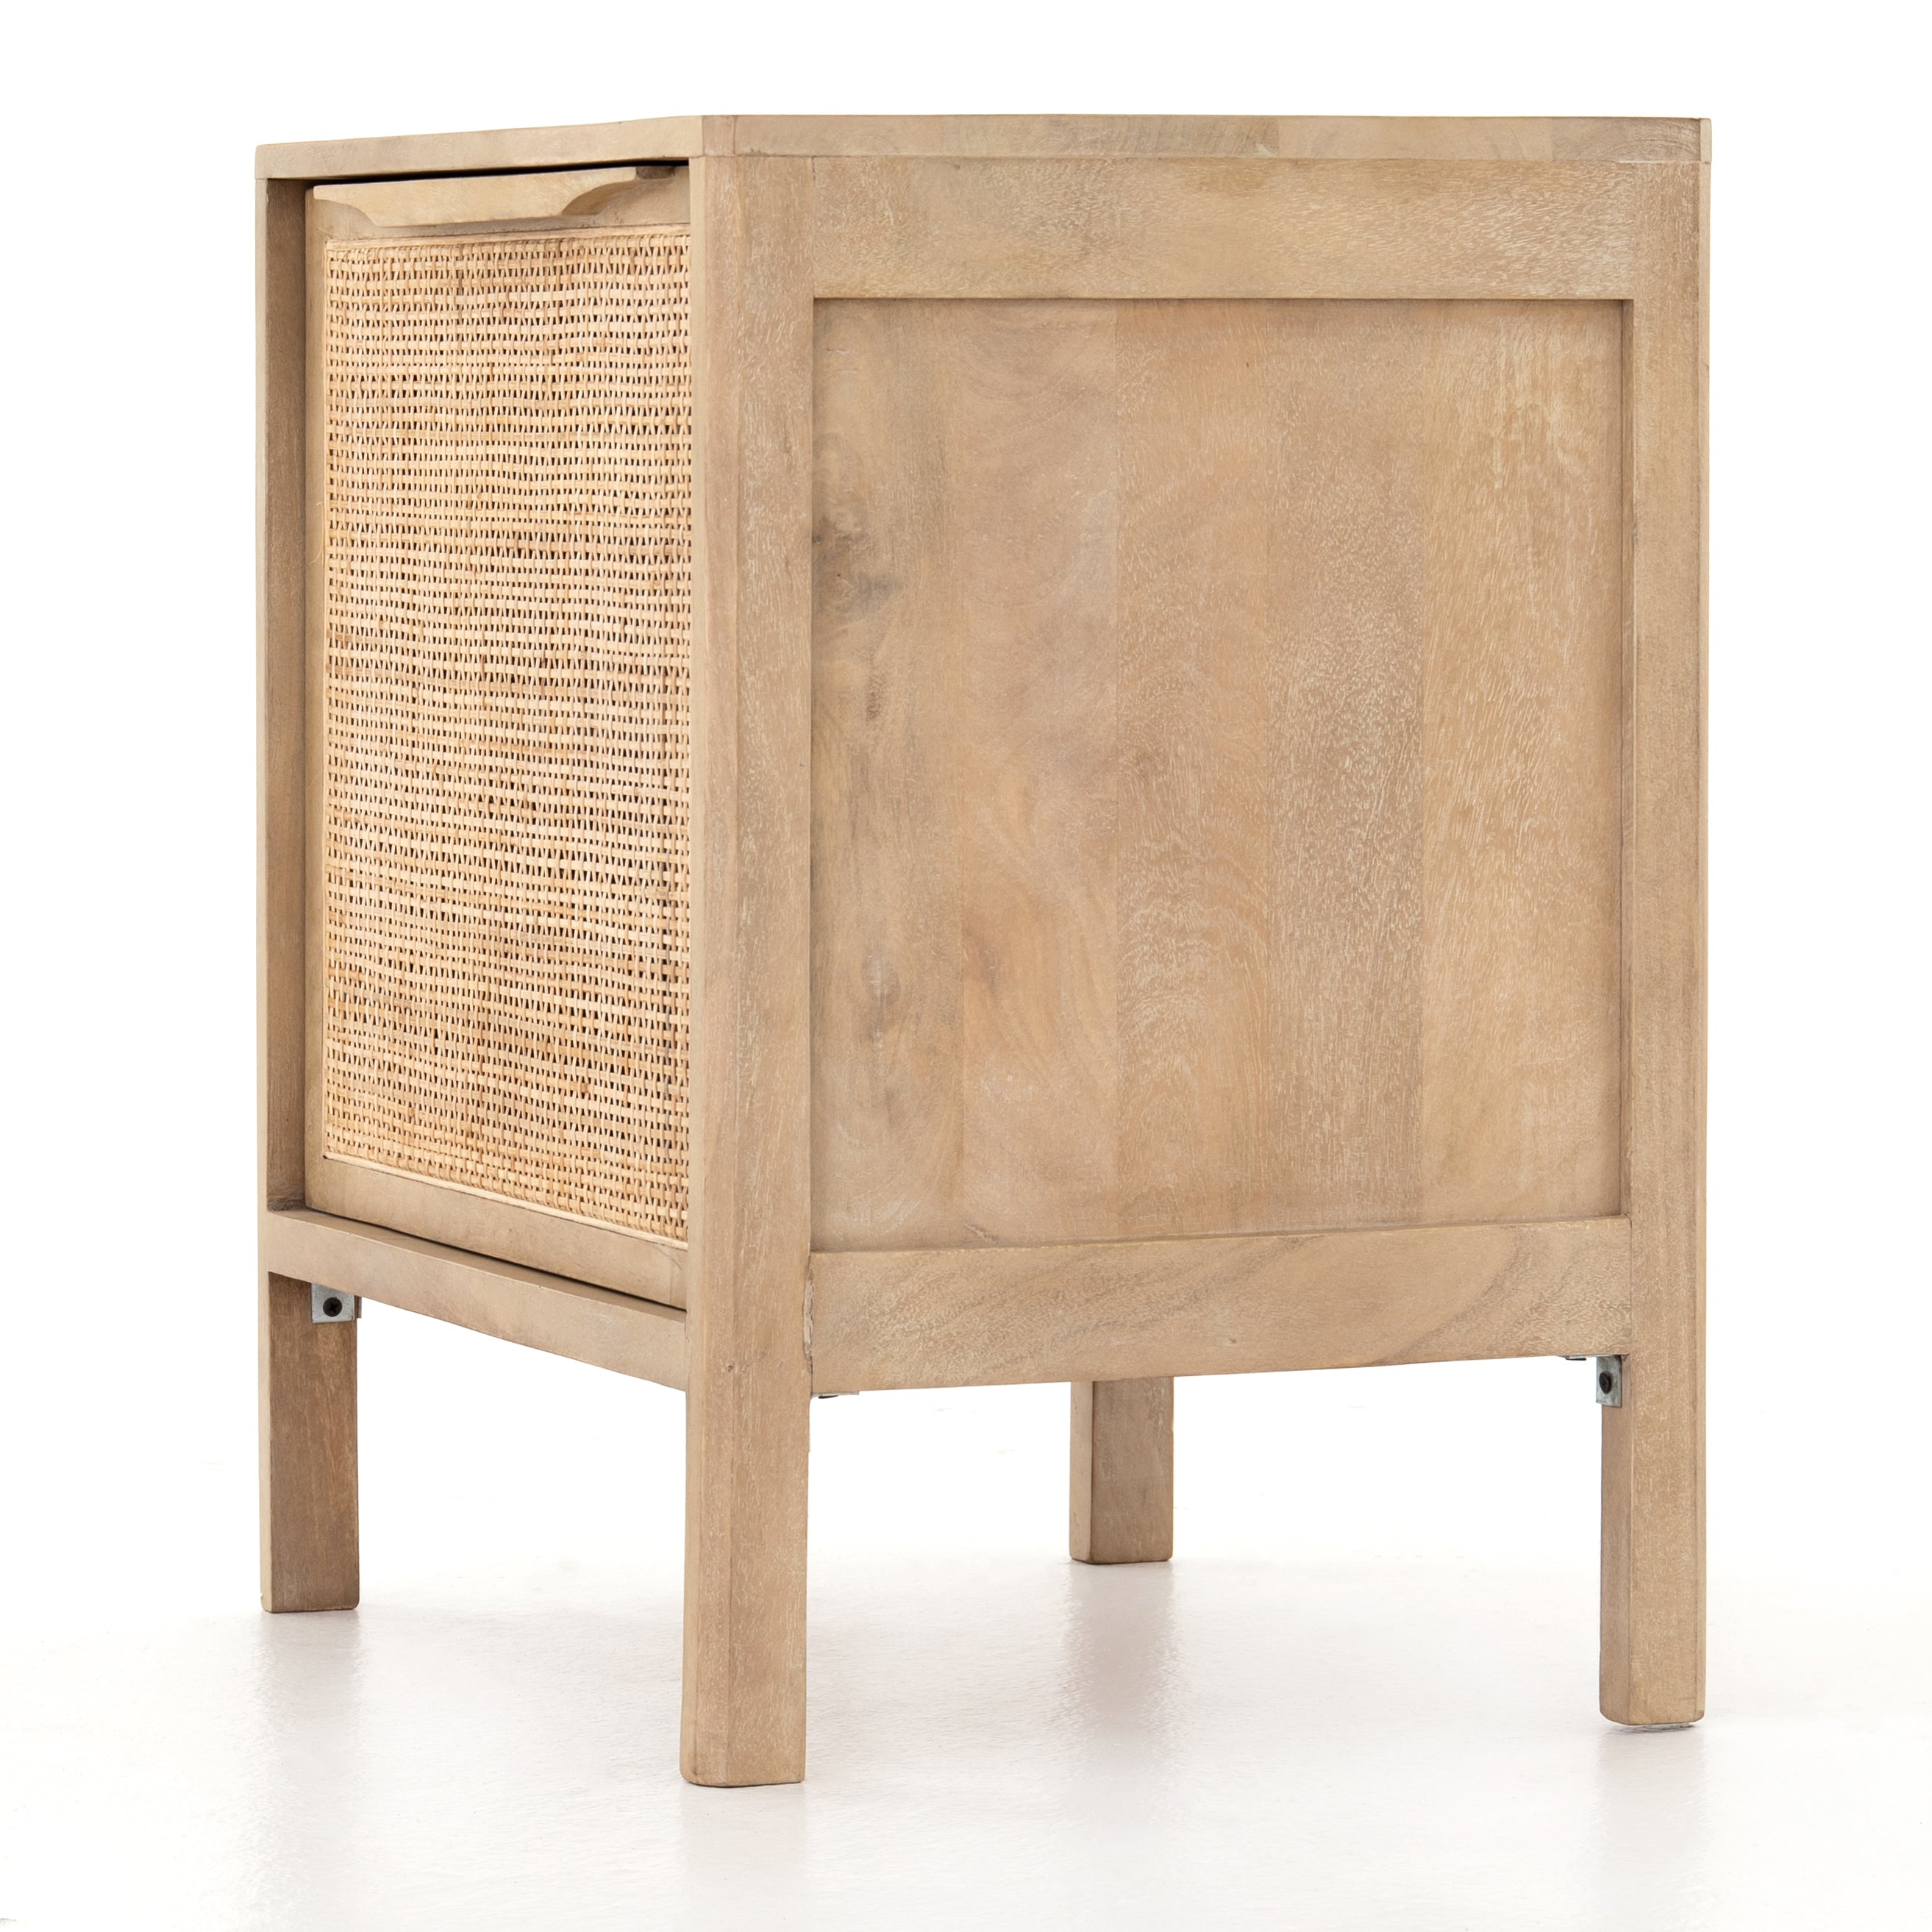 Natural mango frames woven cane, for a light, textural look with fresh organic allure. Interior removable shelf for extra storage options. Amethyst Home provides interior design, new construction, custom furniture, and area rugs in the Washington metro area.